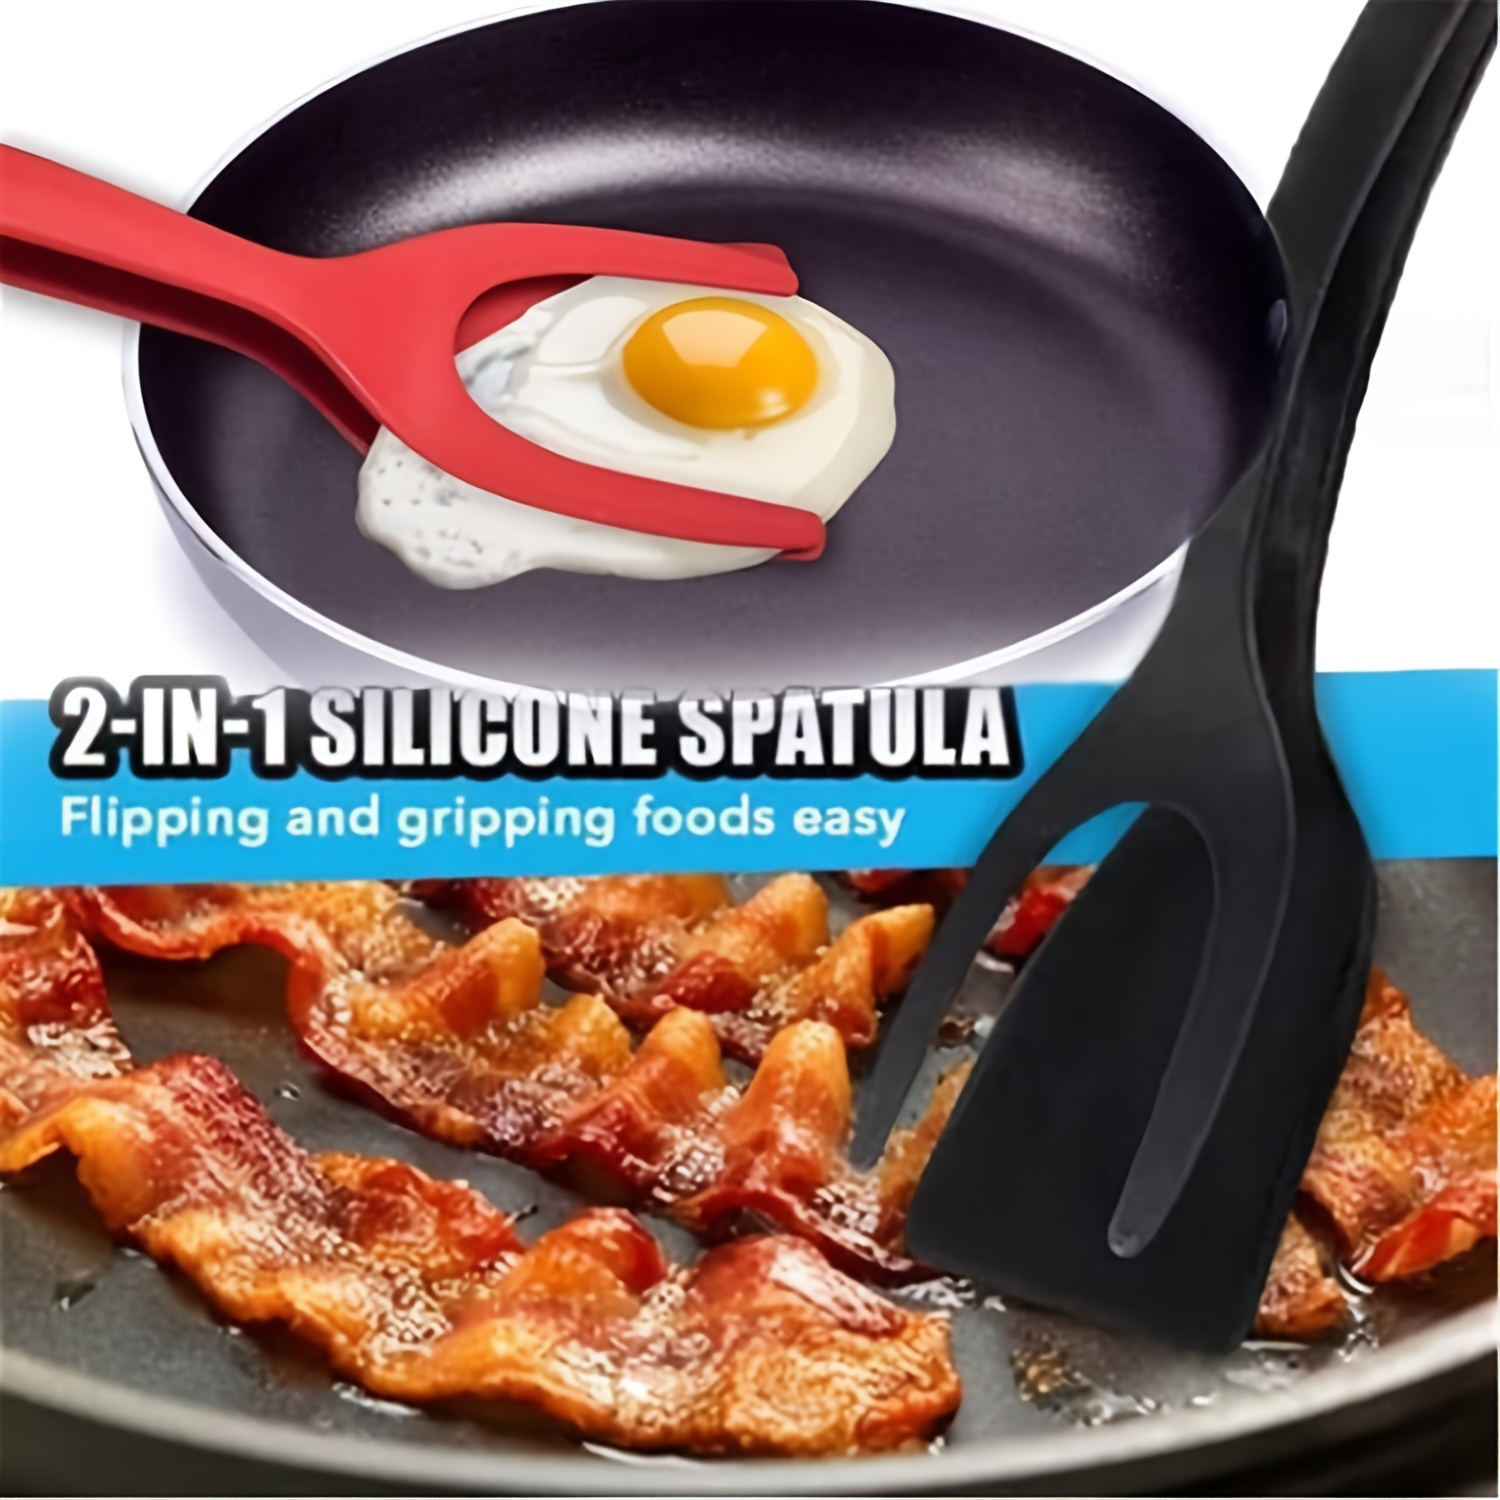 

1pc Multi-functional Egg, Pancake, And Steak Spatula With Slotted Design For Easy Flipping And Serving - Perfect For Bbq, Hamburgers, Patties, And Pancakes, Kitchen Tools